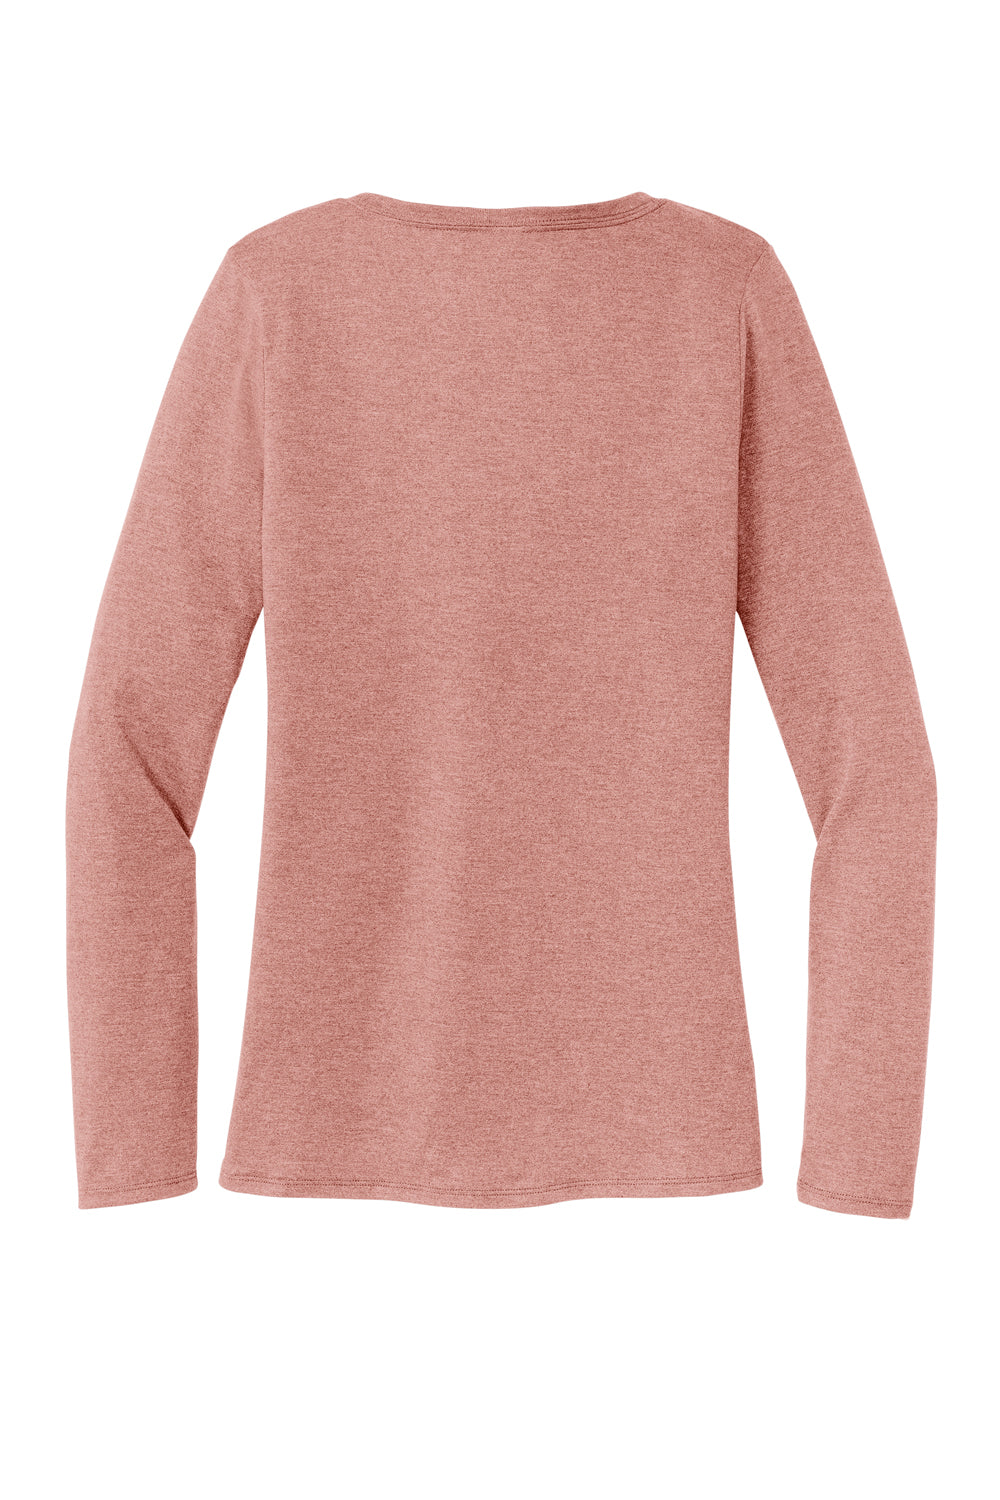 District DT135 Womens Perfect Tri Long Sleeve V-Neck T-Shirt Blush Frost Flat Back